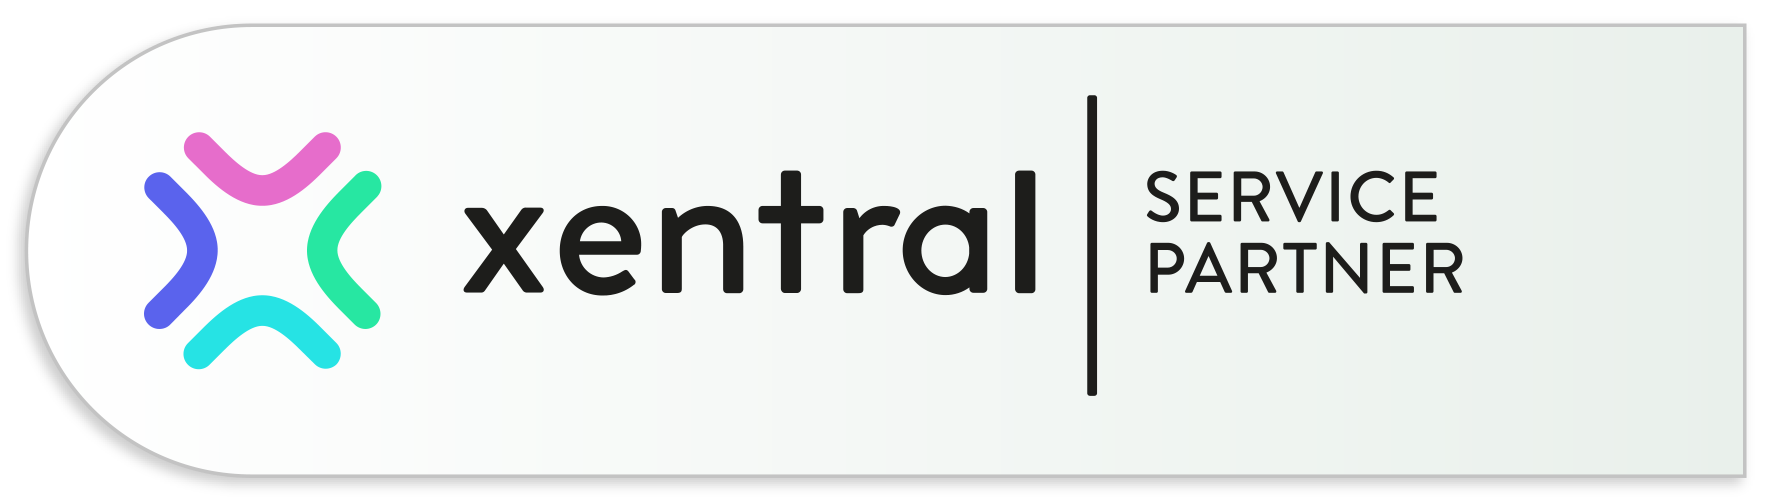 Xentral_PP_Service_Partner_RGB